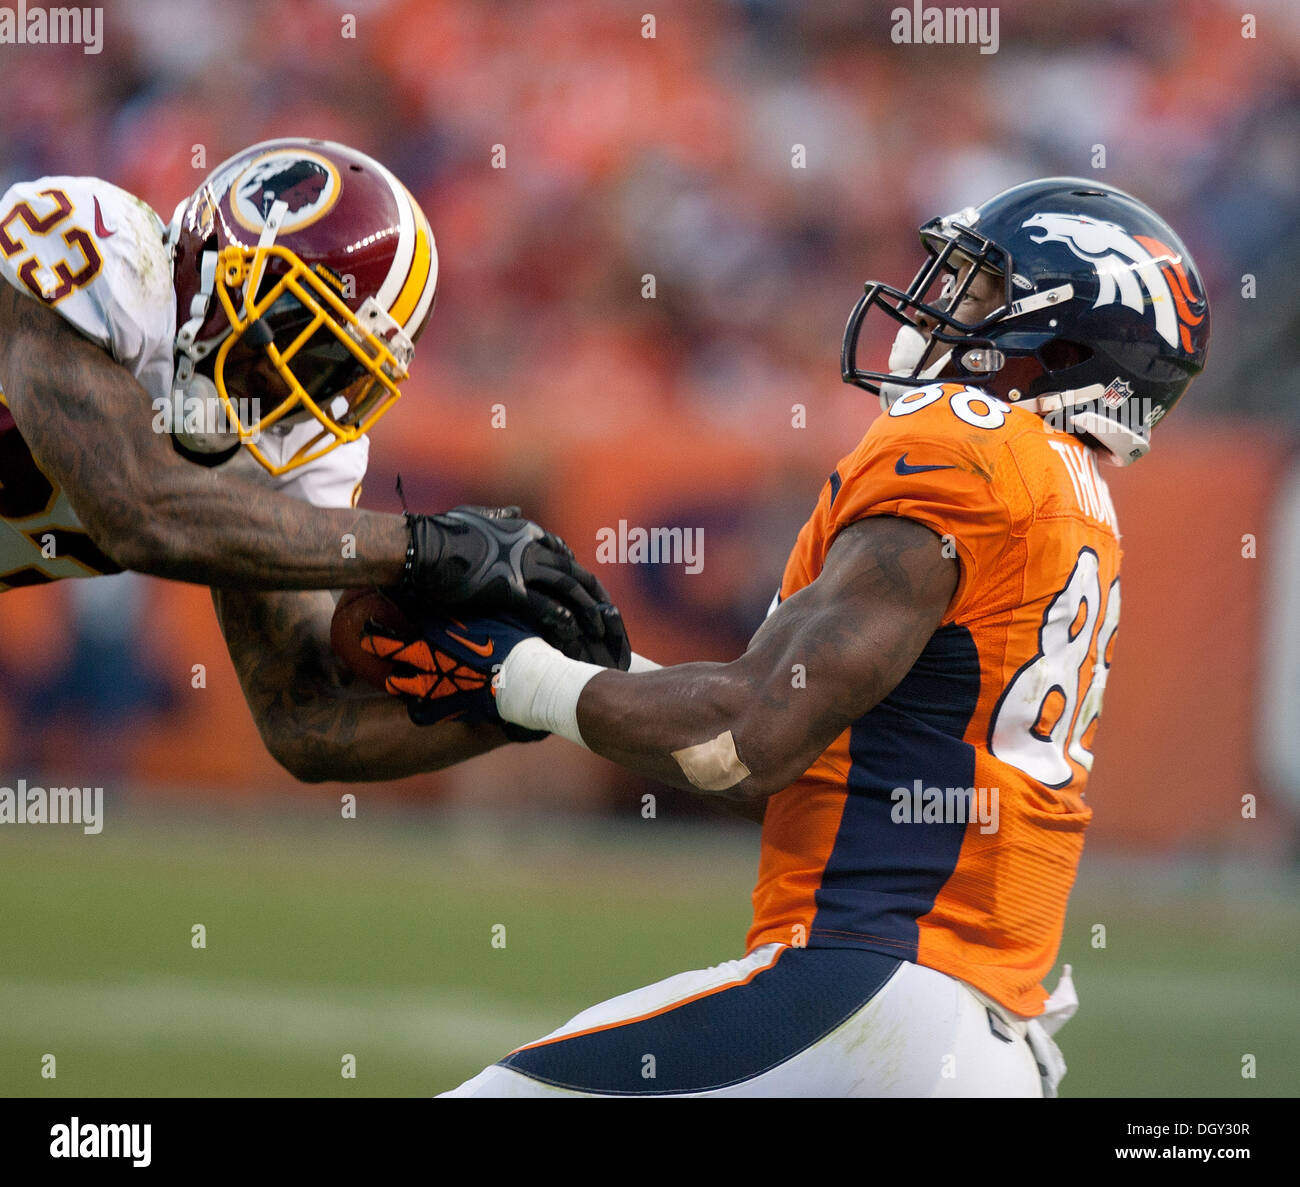 Denver, Colorado, USA. 27th Oct, 2013. Denver Broncos WR DEMARYIUS THOMAS, right, battles for the loose ball against the Redskins S DEANGELO HALL, left, during the 4th. quarter at Sports Authority Field at Mile High Sunday afternoon. Broncos beat the Redskins 45-21. © Hector Acevedo/ZUMAPRESS.com/Alamy Live News Stock Photo